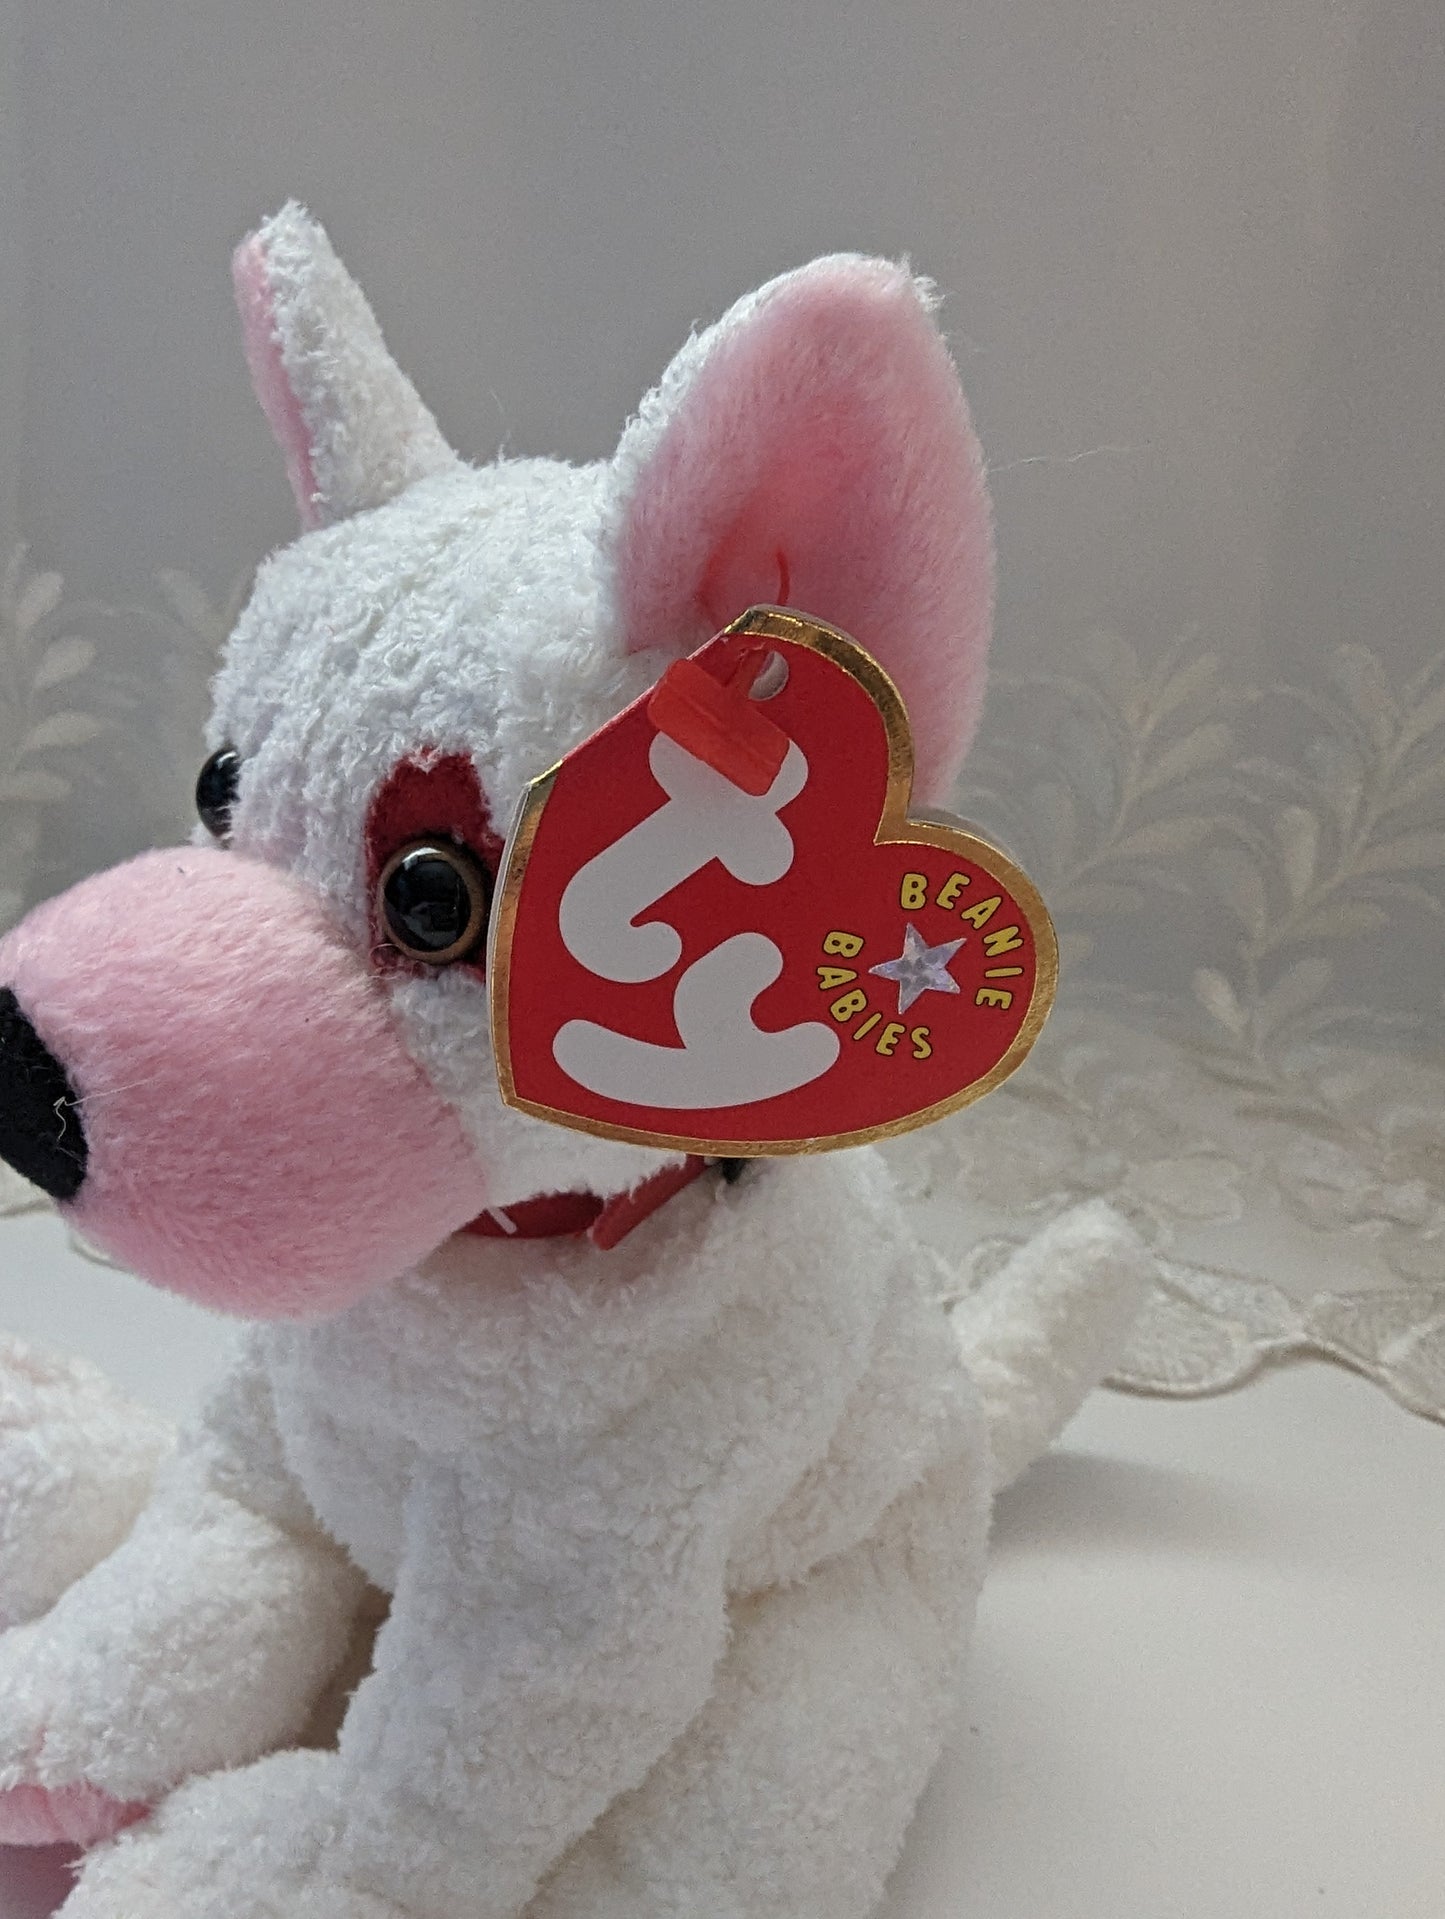 Ty Beanie Baby - Cupid The Dog (6in) Heart On Left Eye - Vintage Beanies Canada